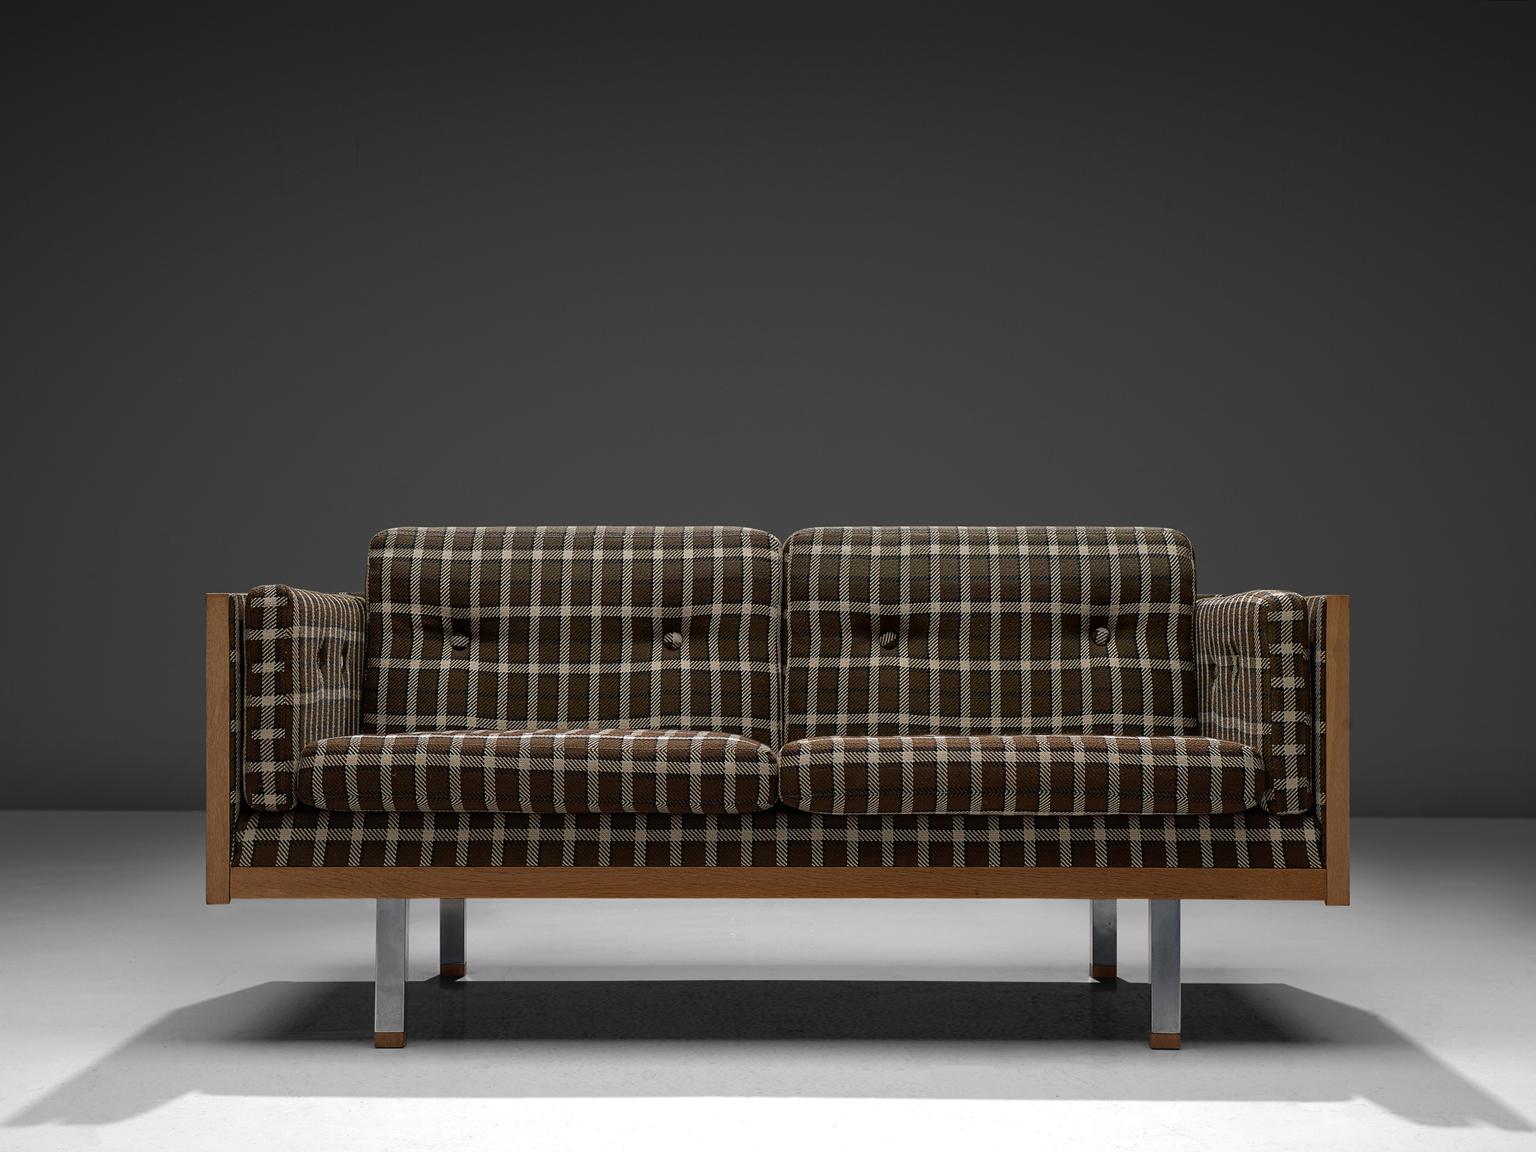 Jydsk Mobelvaerk, two-seat sofa, in oak, metal and fabric, Denmark, 1960s. 

Scandinavian two-seat sofa. The frame consist of oak with cubic metal legs, which provide an open look to the quite solid seating. All sides are covered with wood and